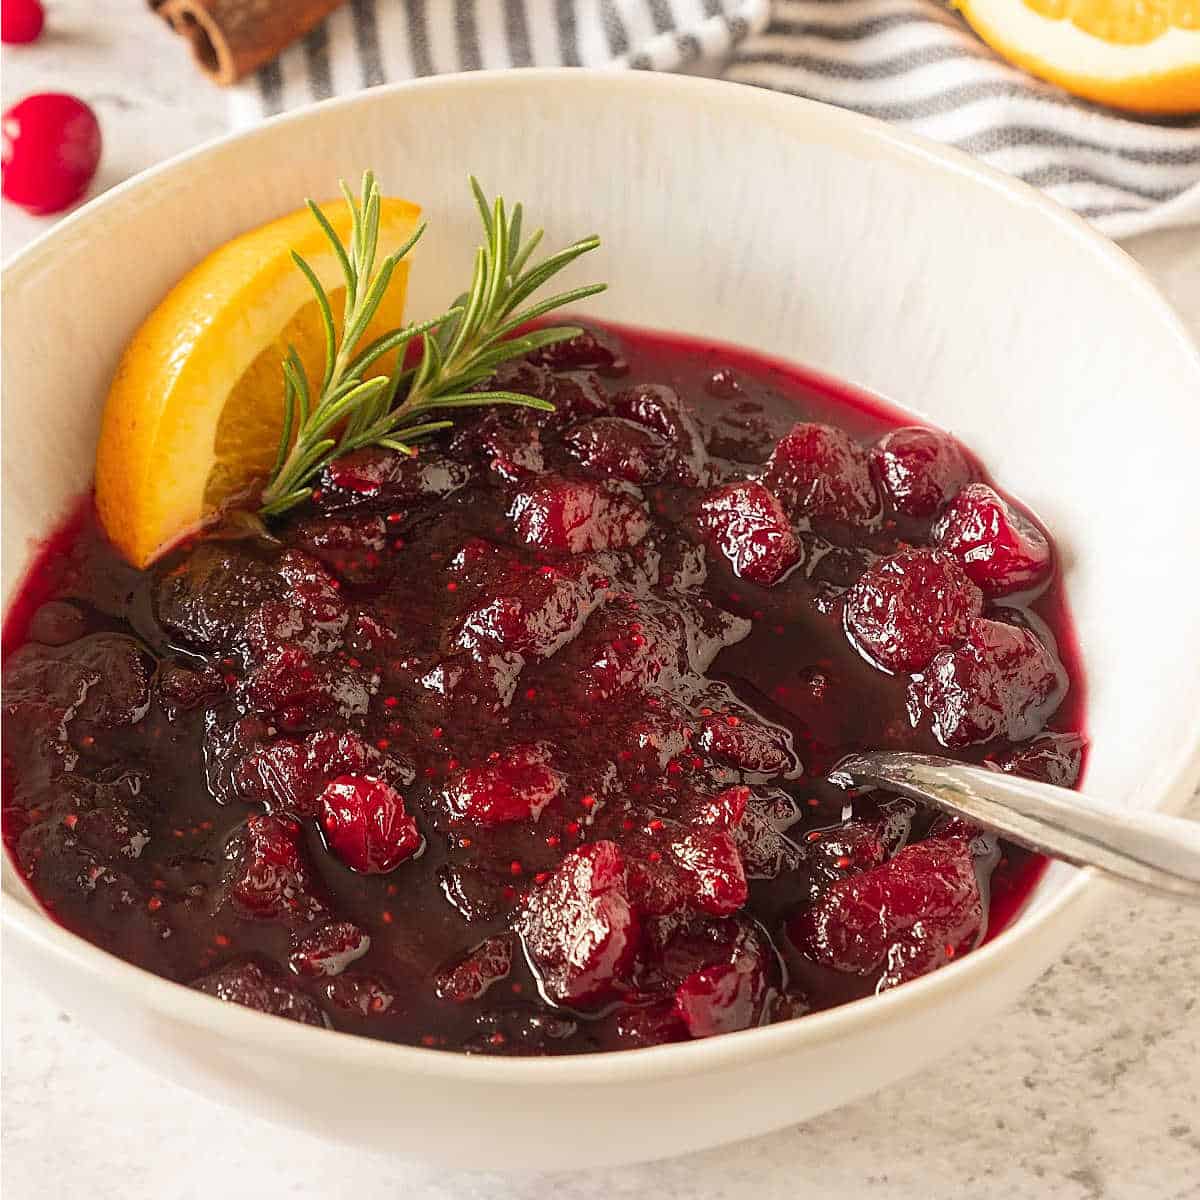 Orange cranberry sauce in a white bowl with a spoon, rosemary sprig and orange wedge.